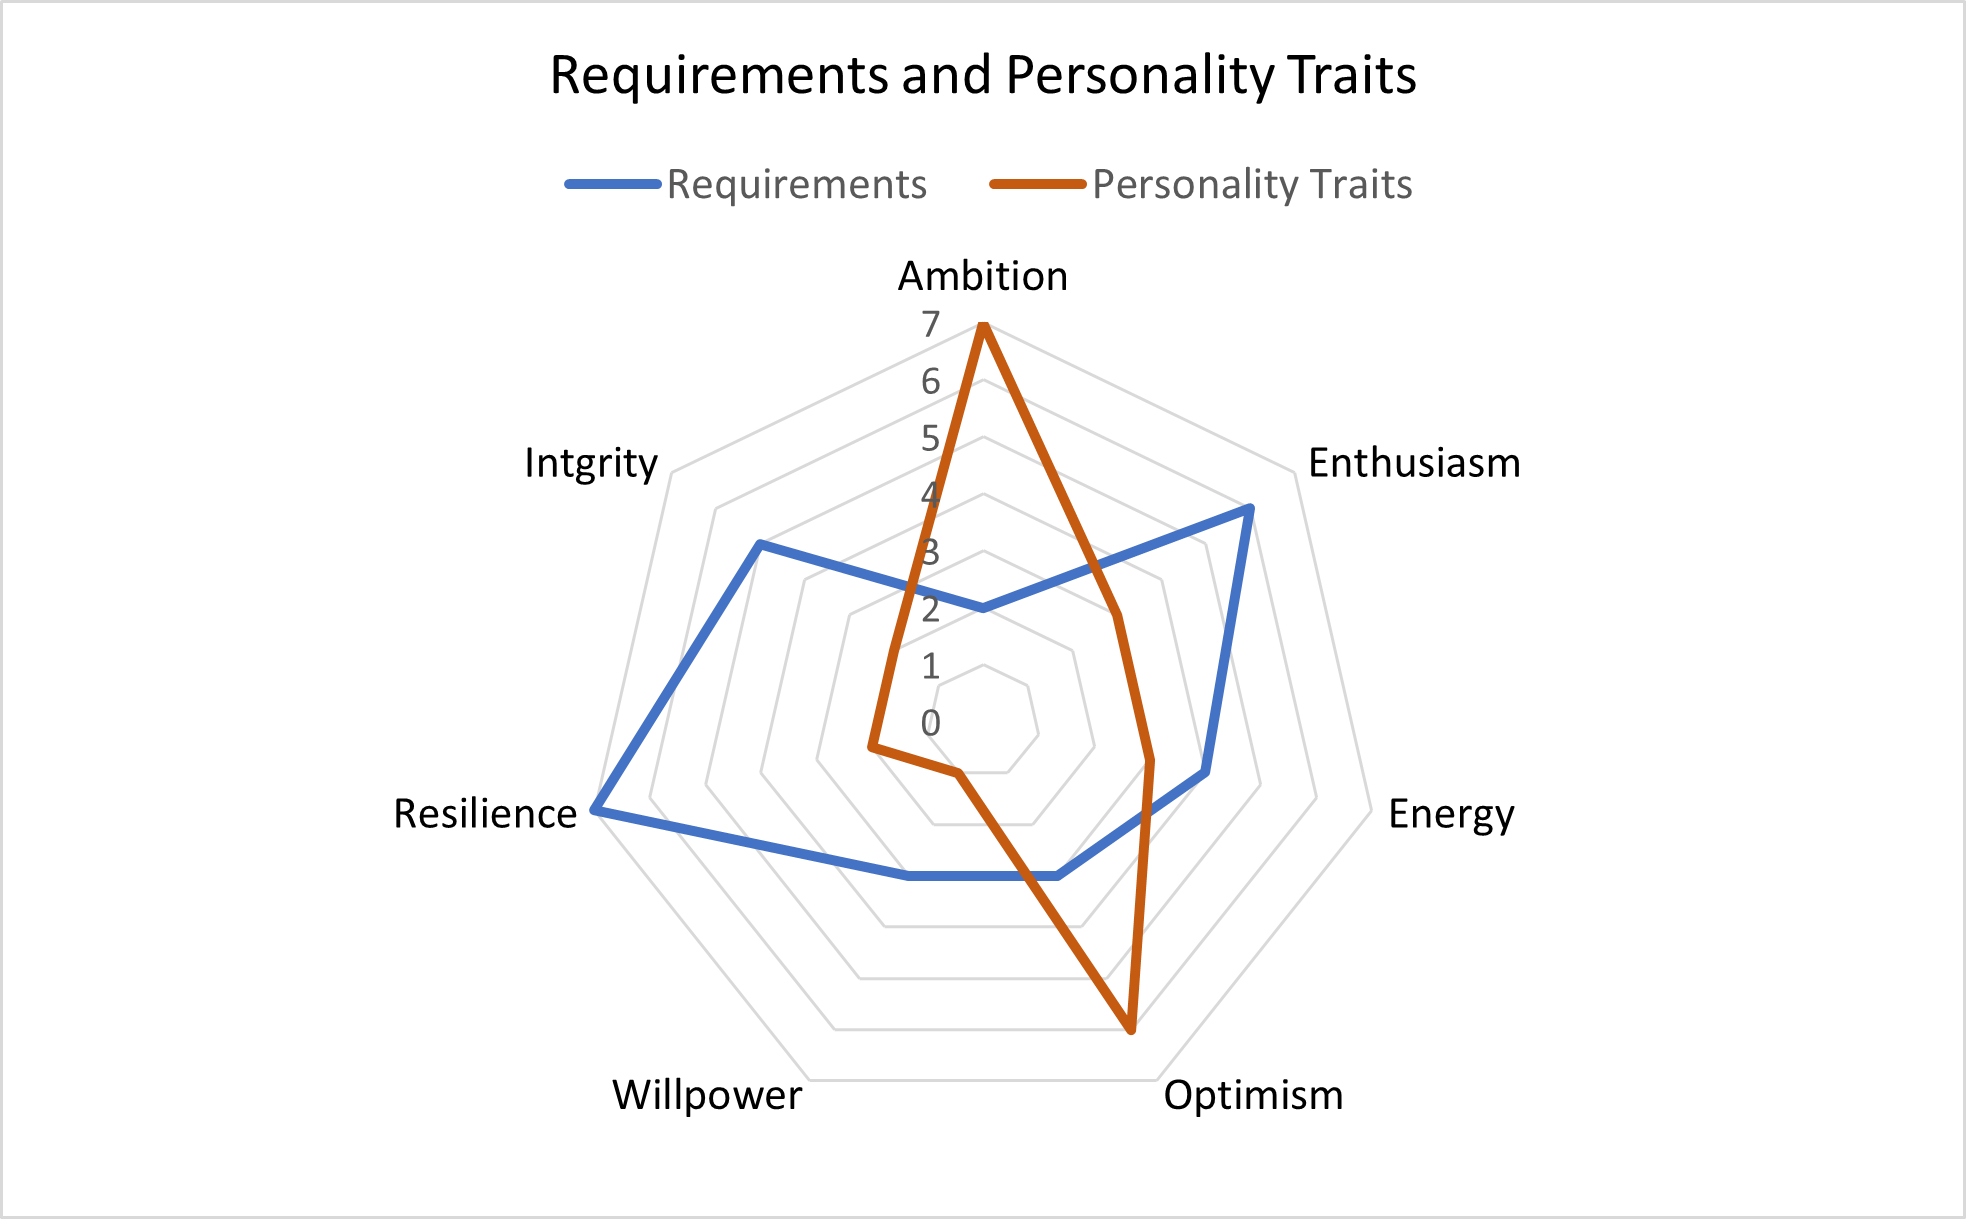 Requirements and personality traits